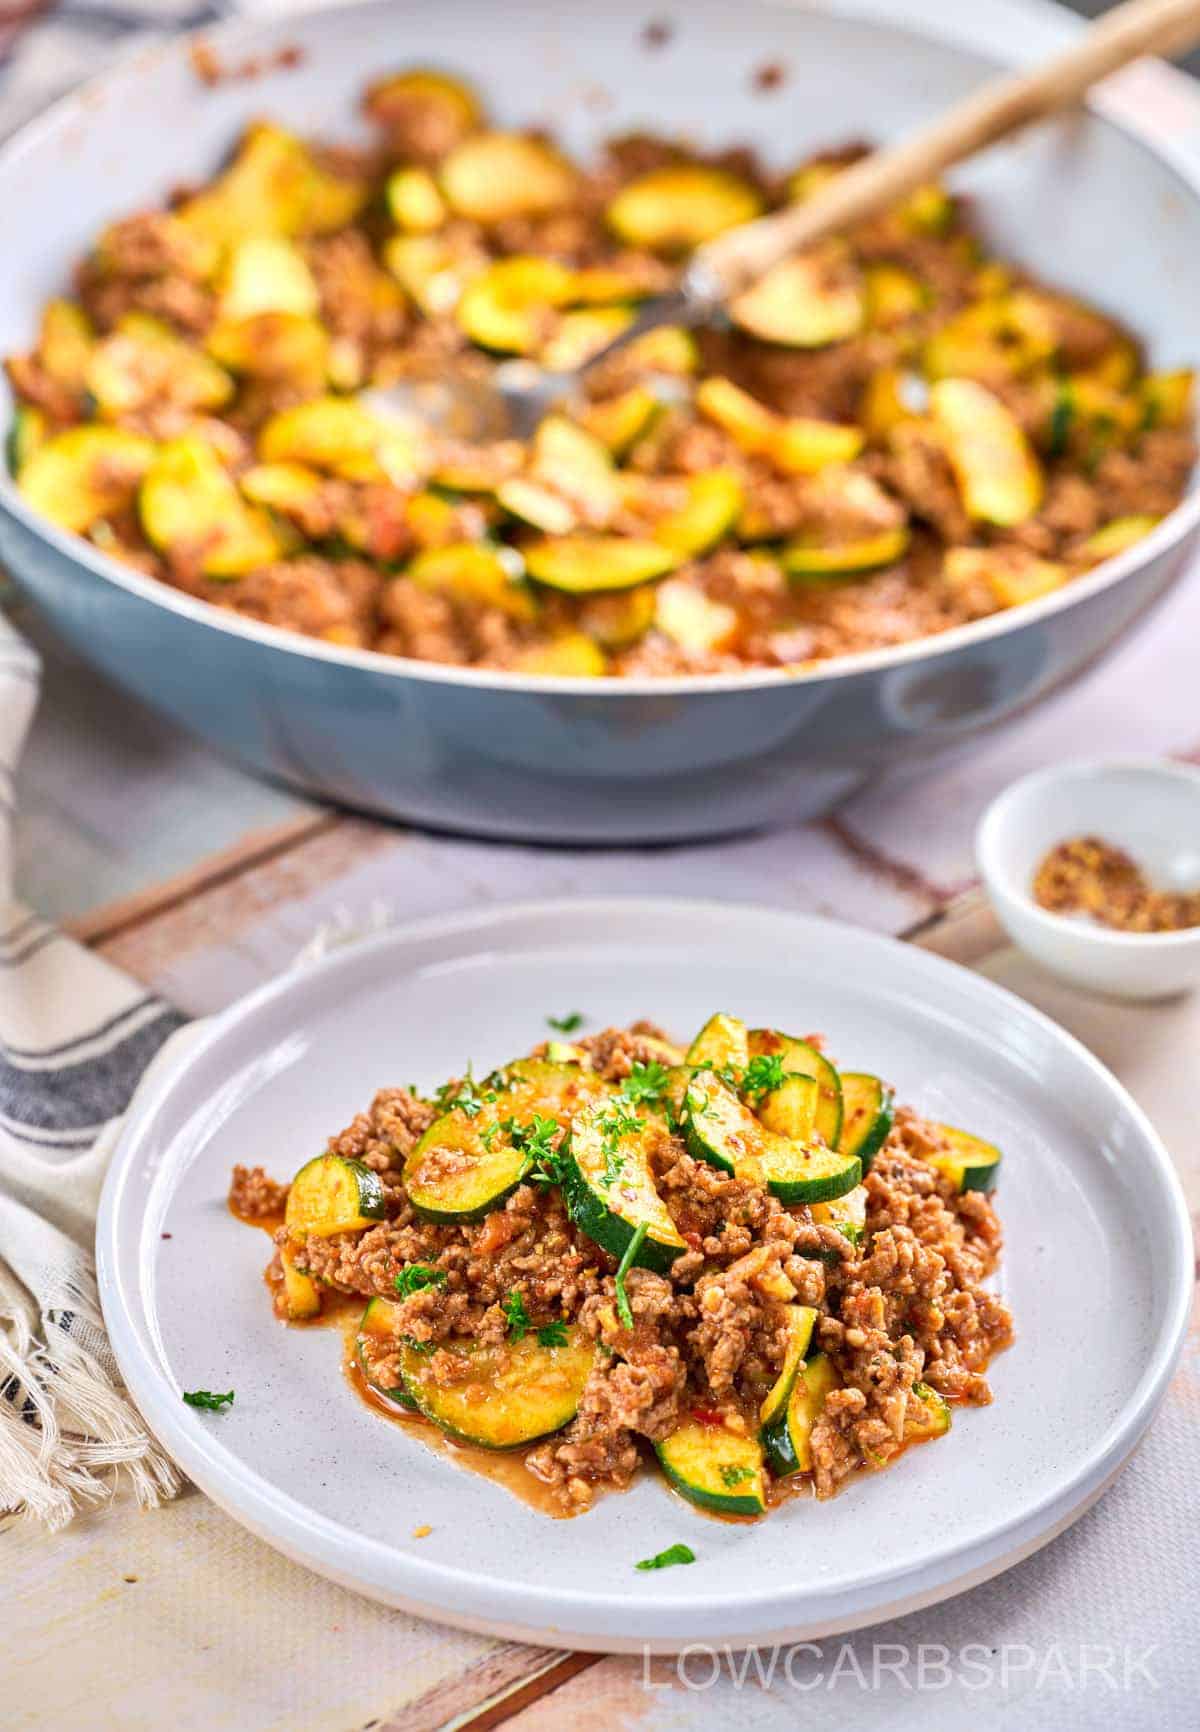 Mexican Zucchini And Beef / Easy Mexican Zucchini And Beef Skillet 6.
